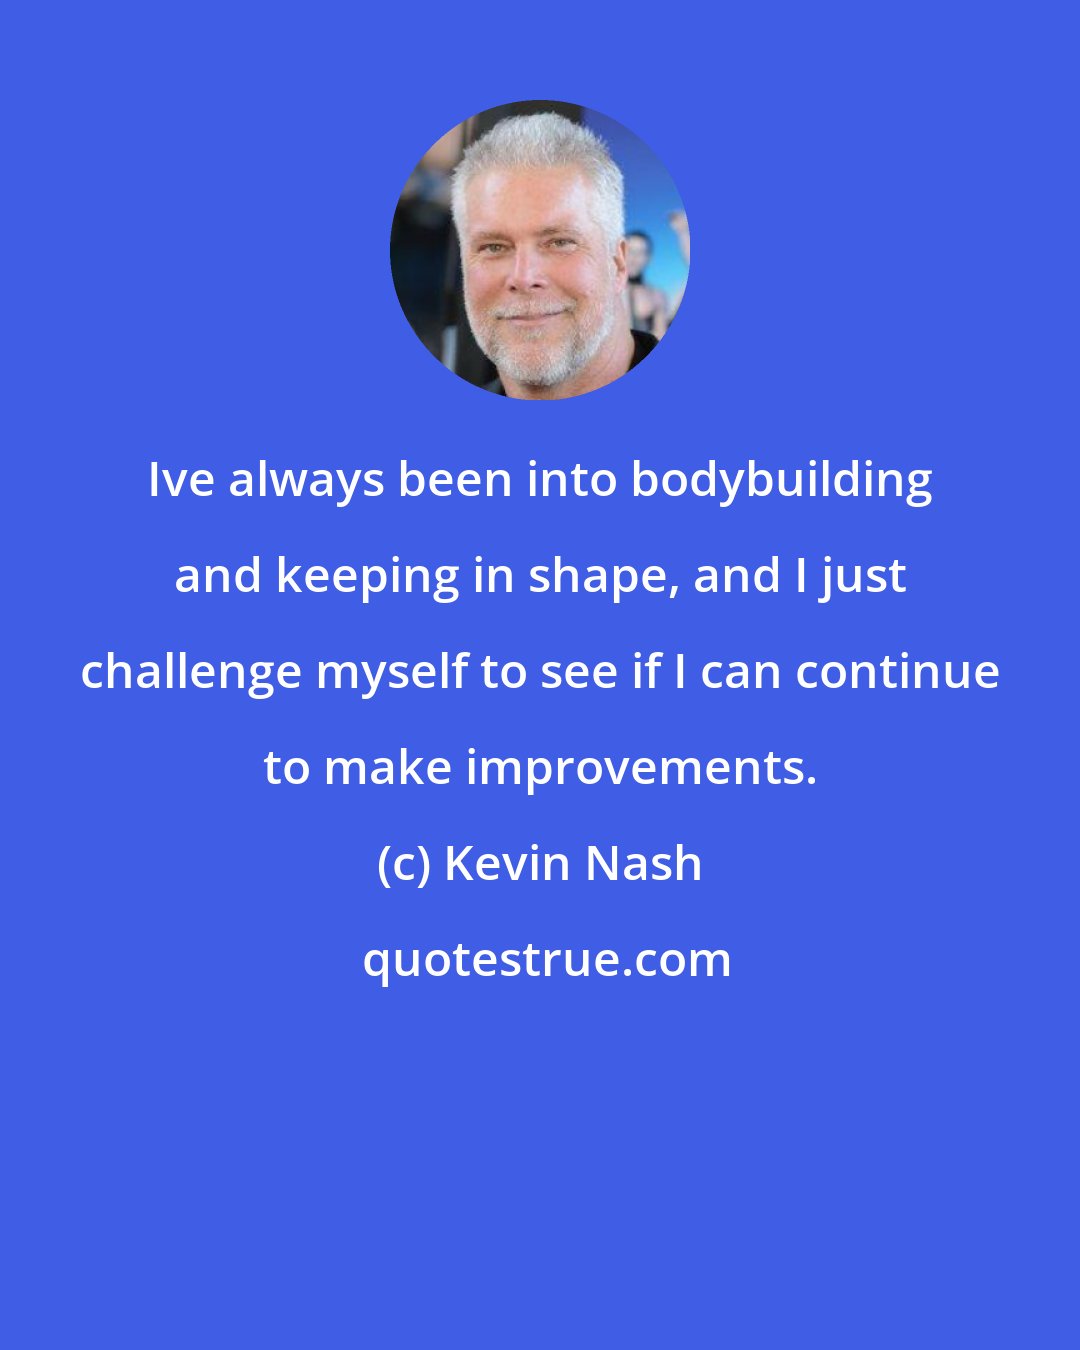 Kevin Nash: Ive always been into bodybuilding and keeping in shape, and I just challenge myself to see if I can continue to make improvements.